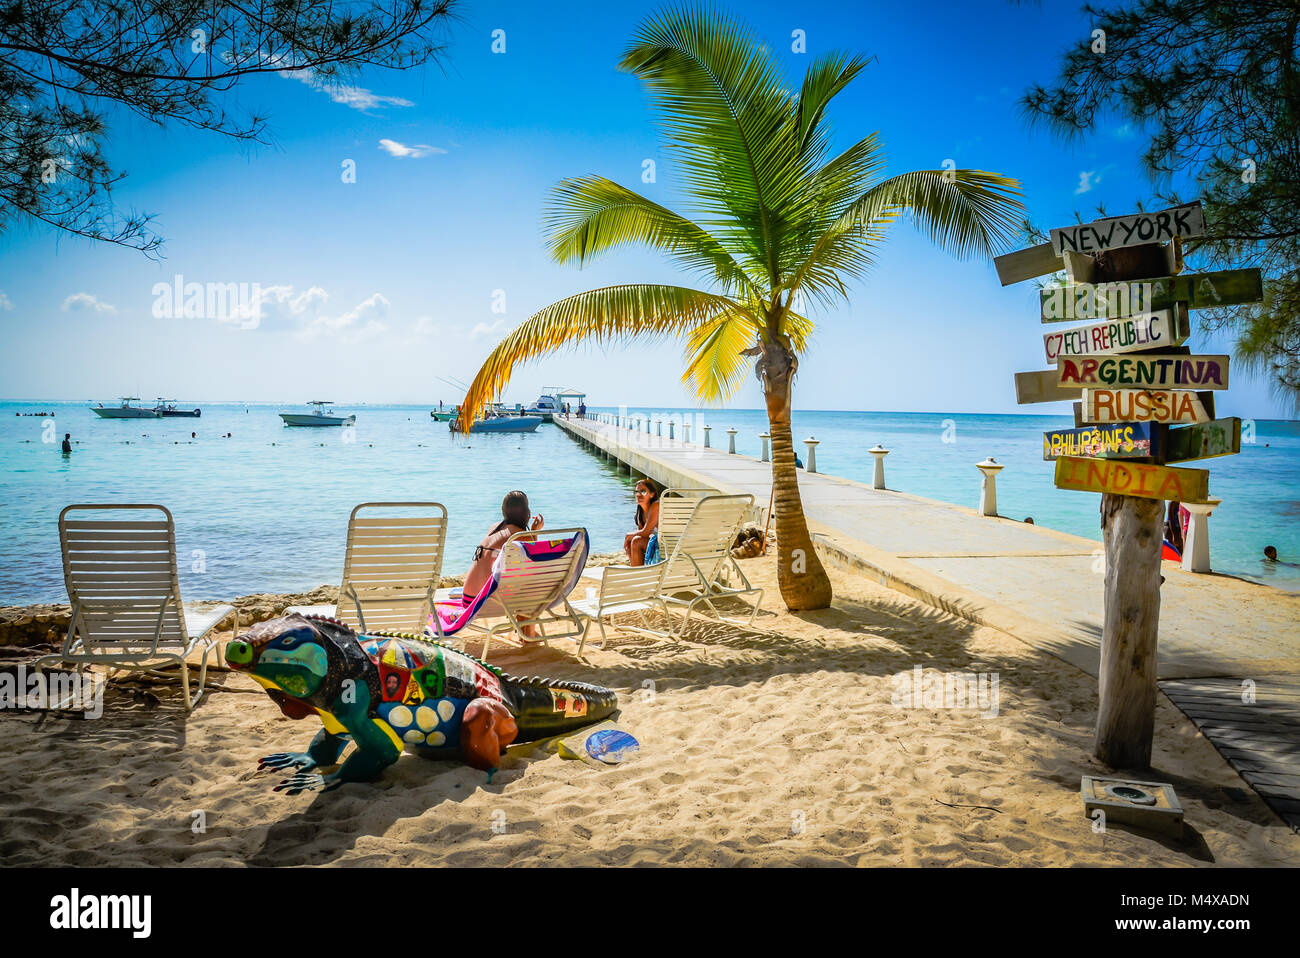 International destinations signpost at pier next to chaise lounges and palm trees on beach with blue iguana statue at Rum Point Club, Grand Cayman. Stock Photo